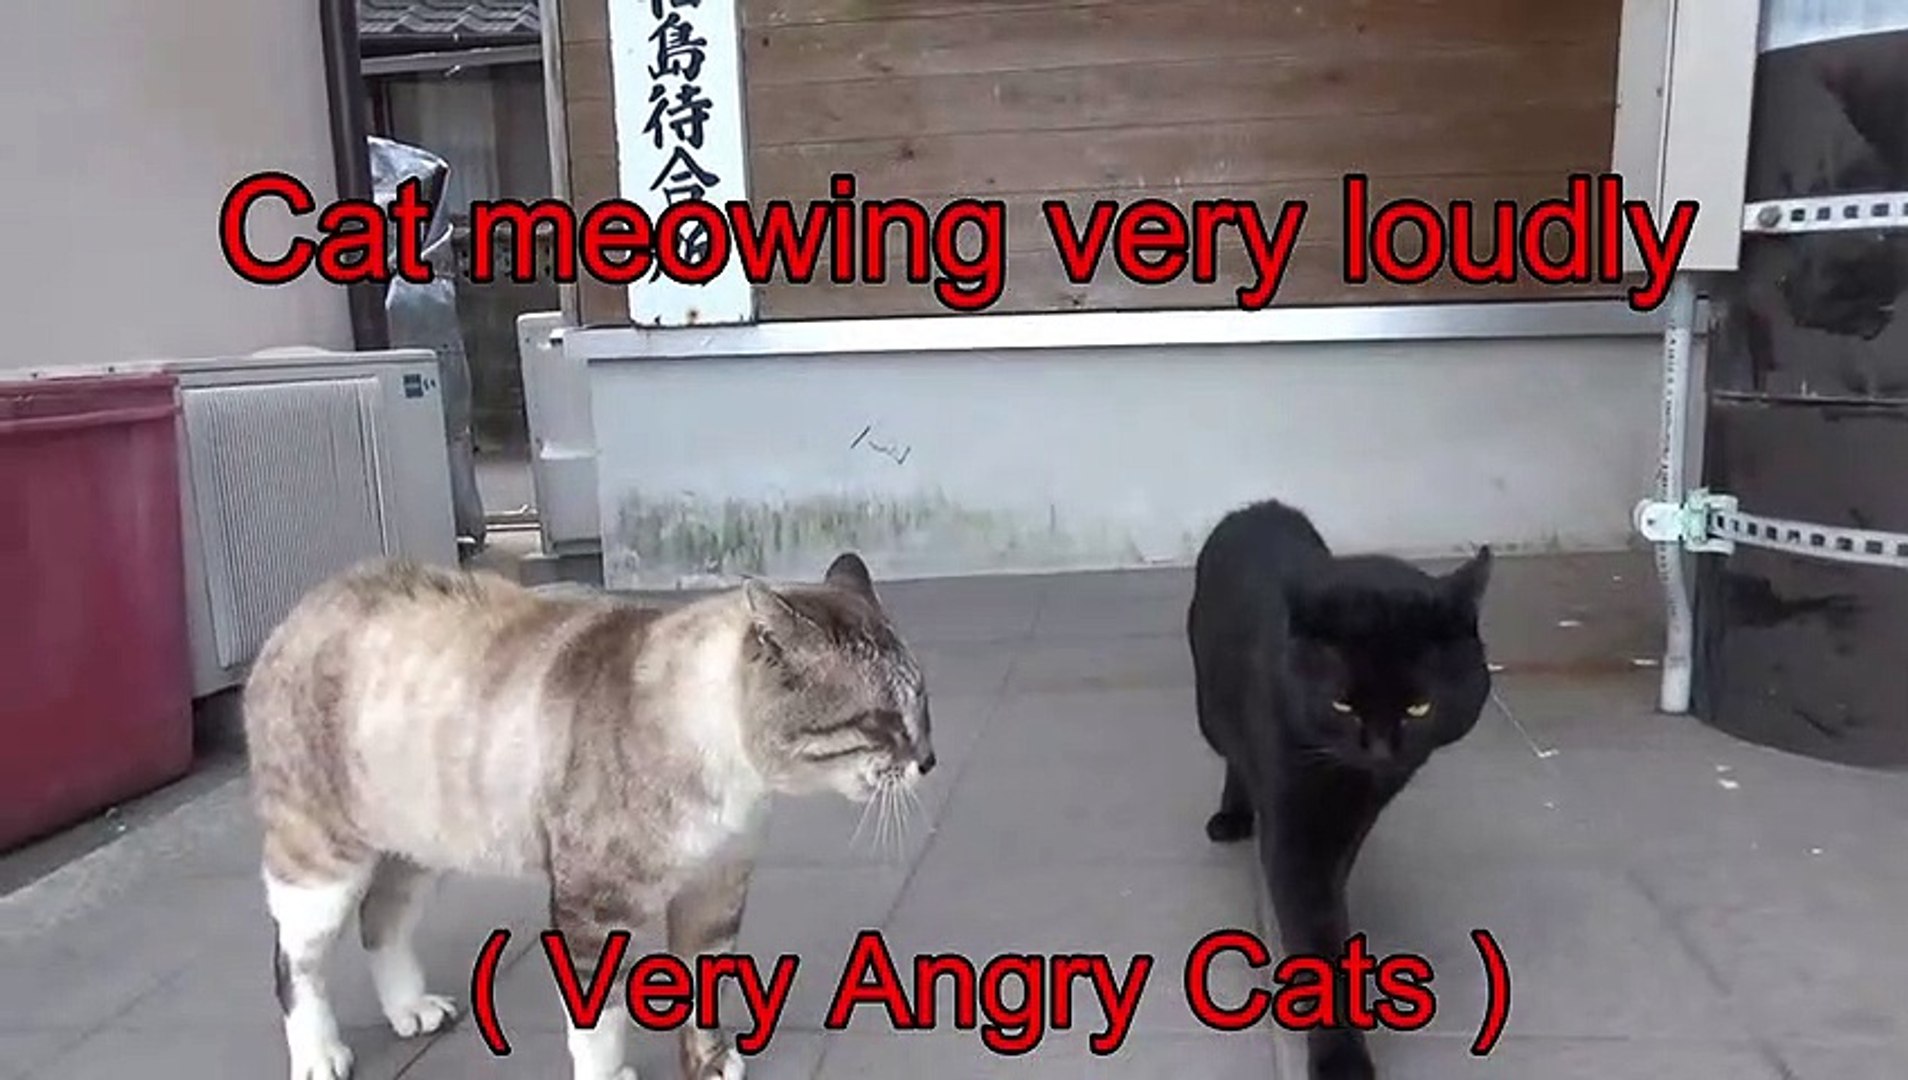 Cats meowing very loudly ( Very Angry Cats ) 